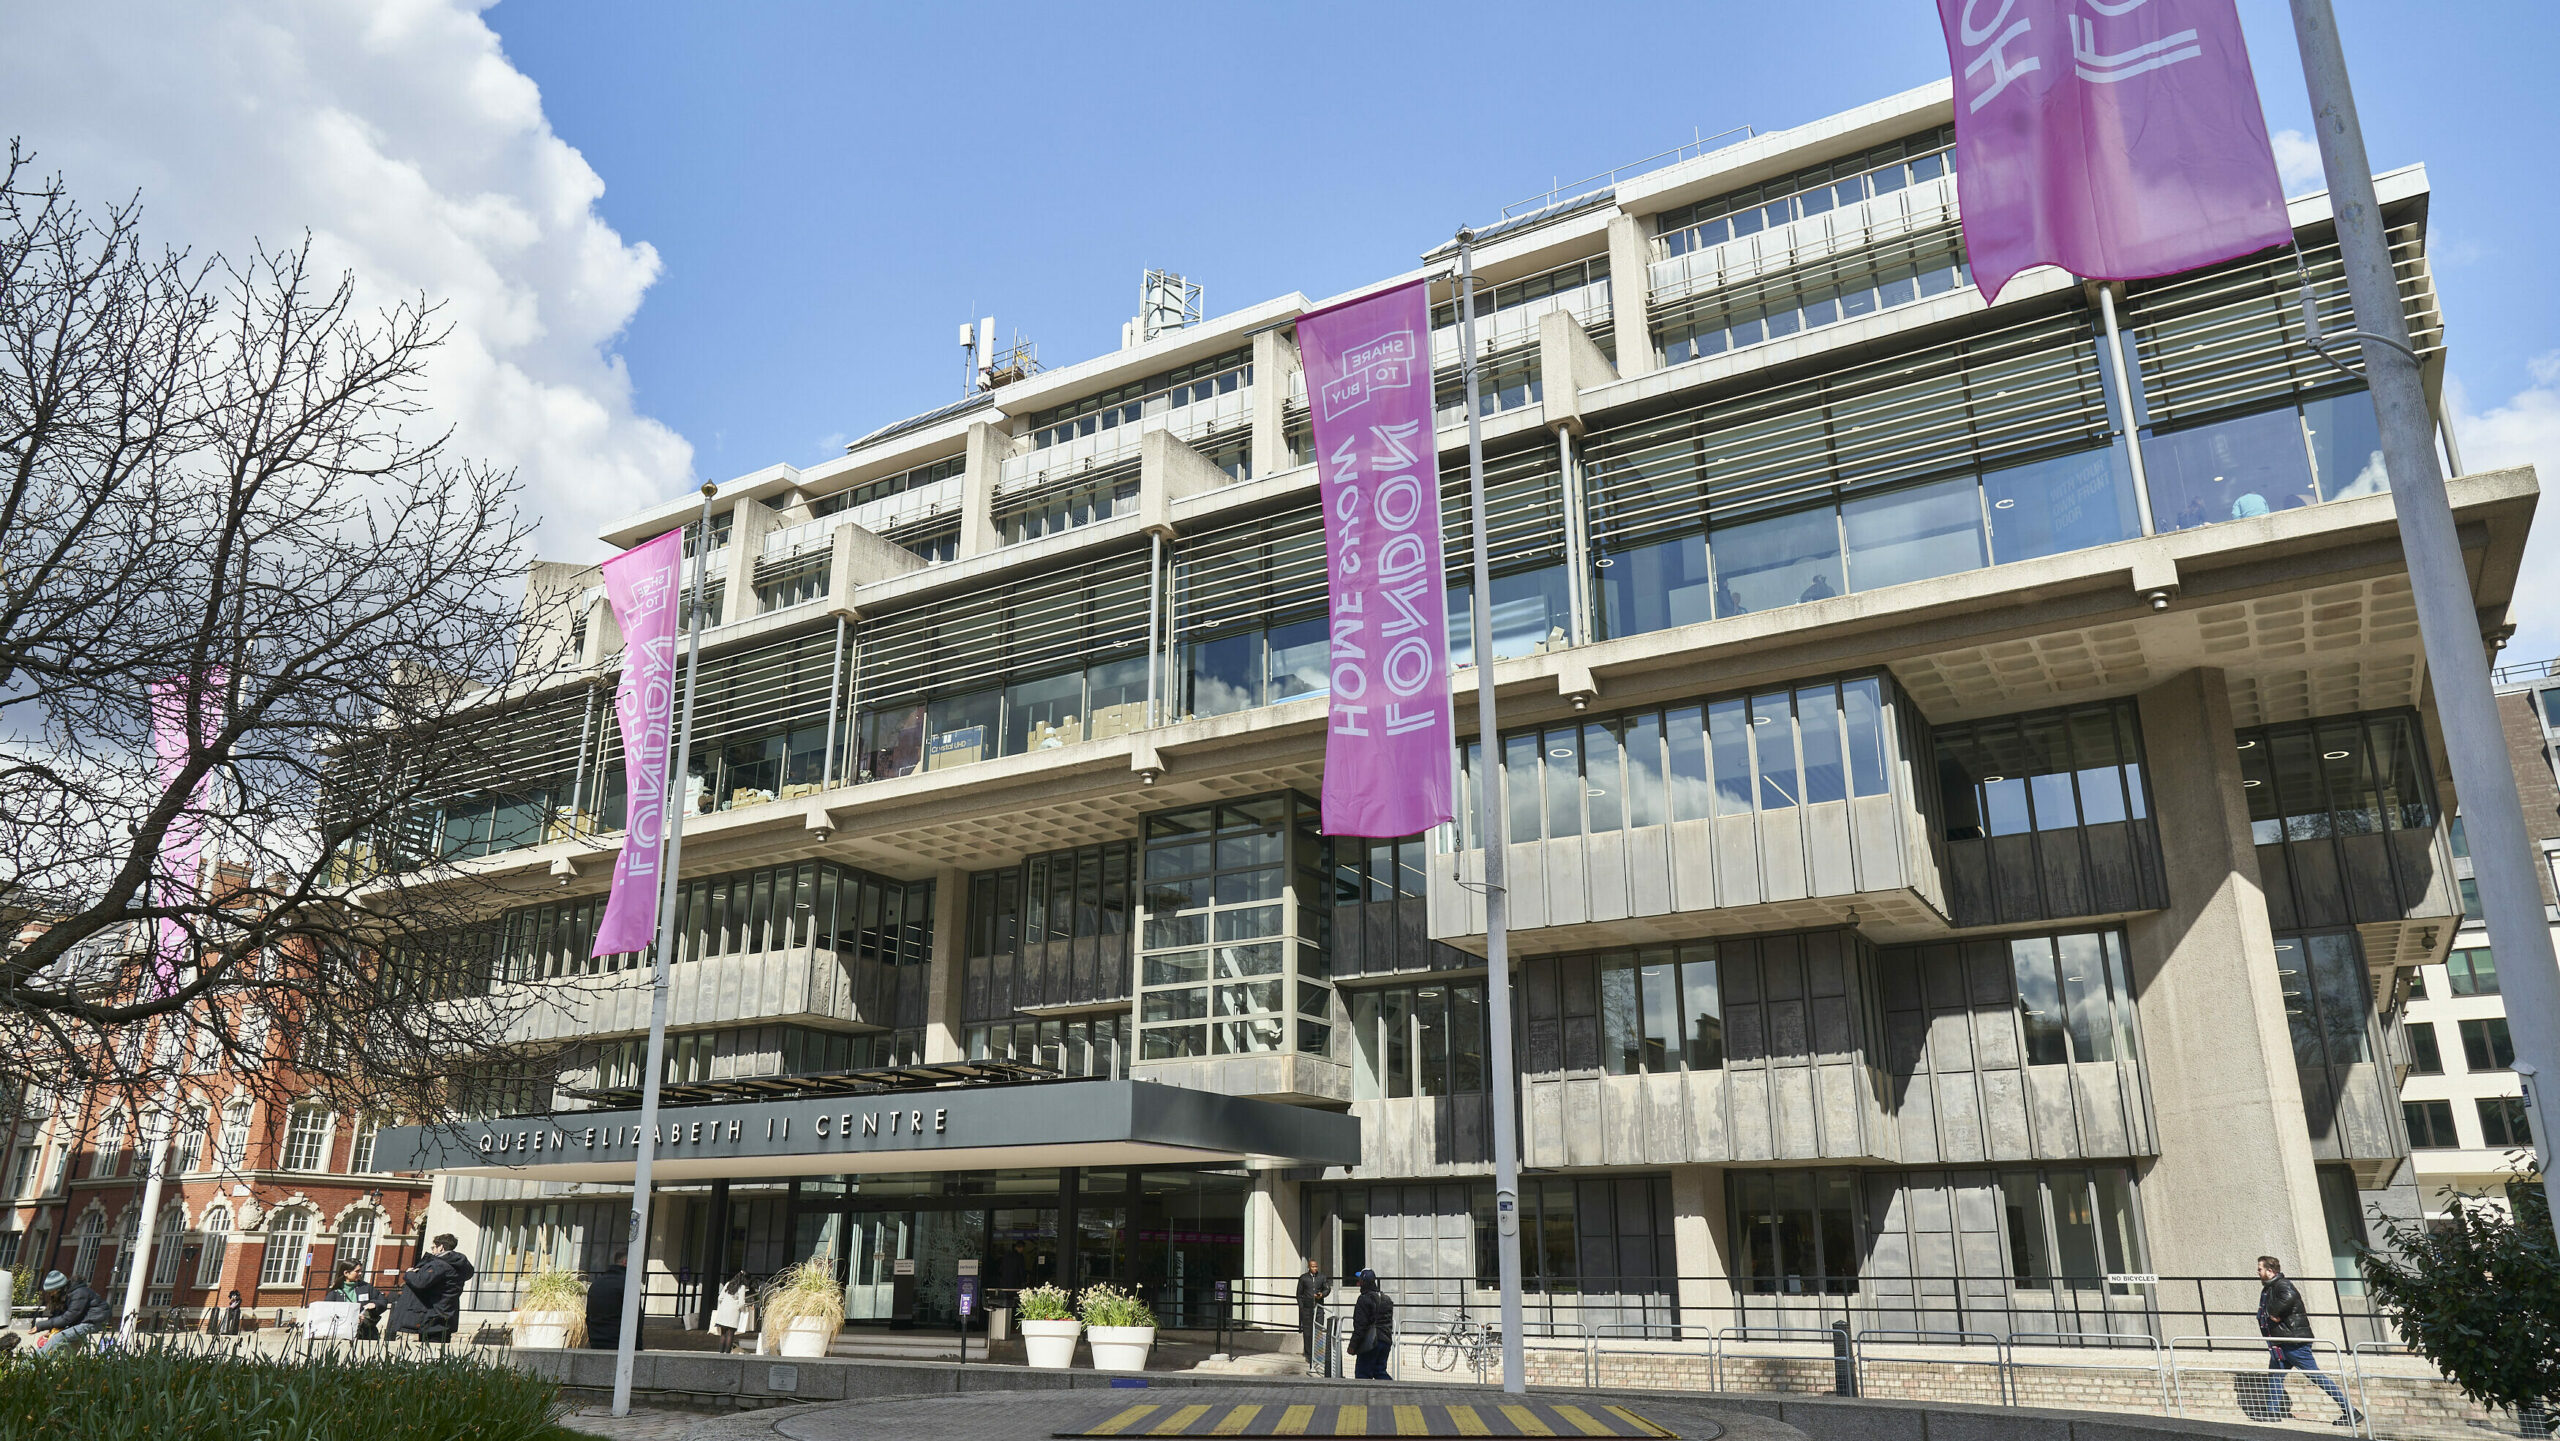 An exterior image of the QEII Centre Westminster 